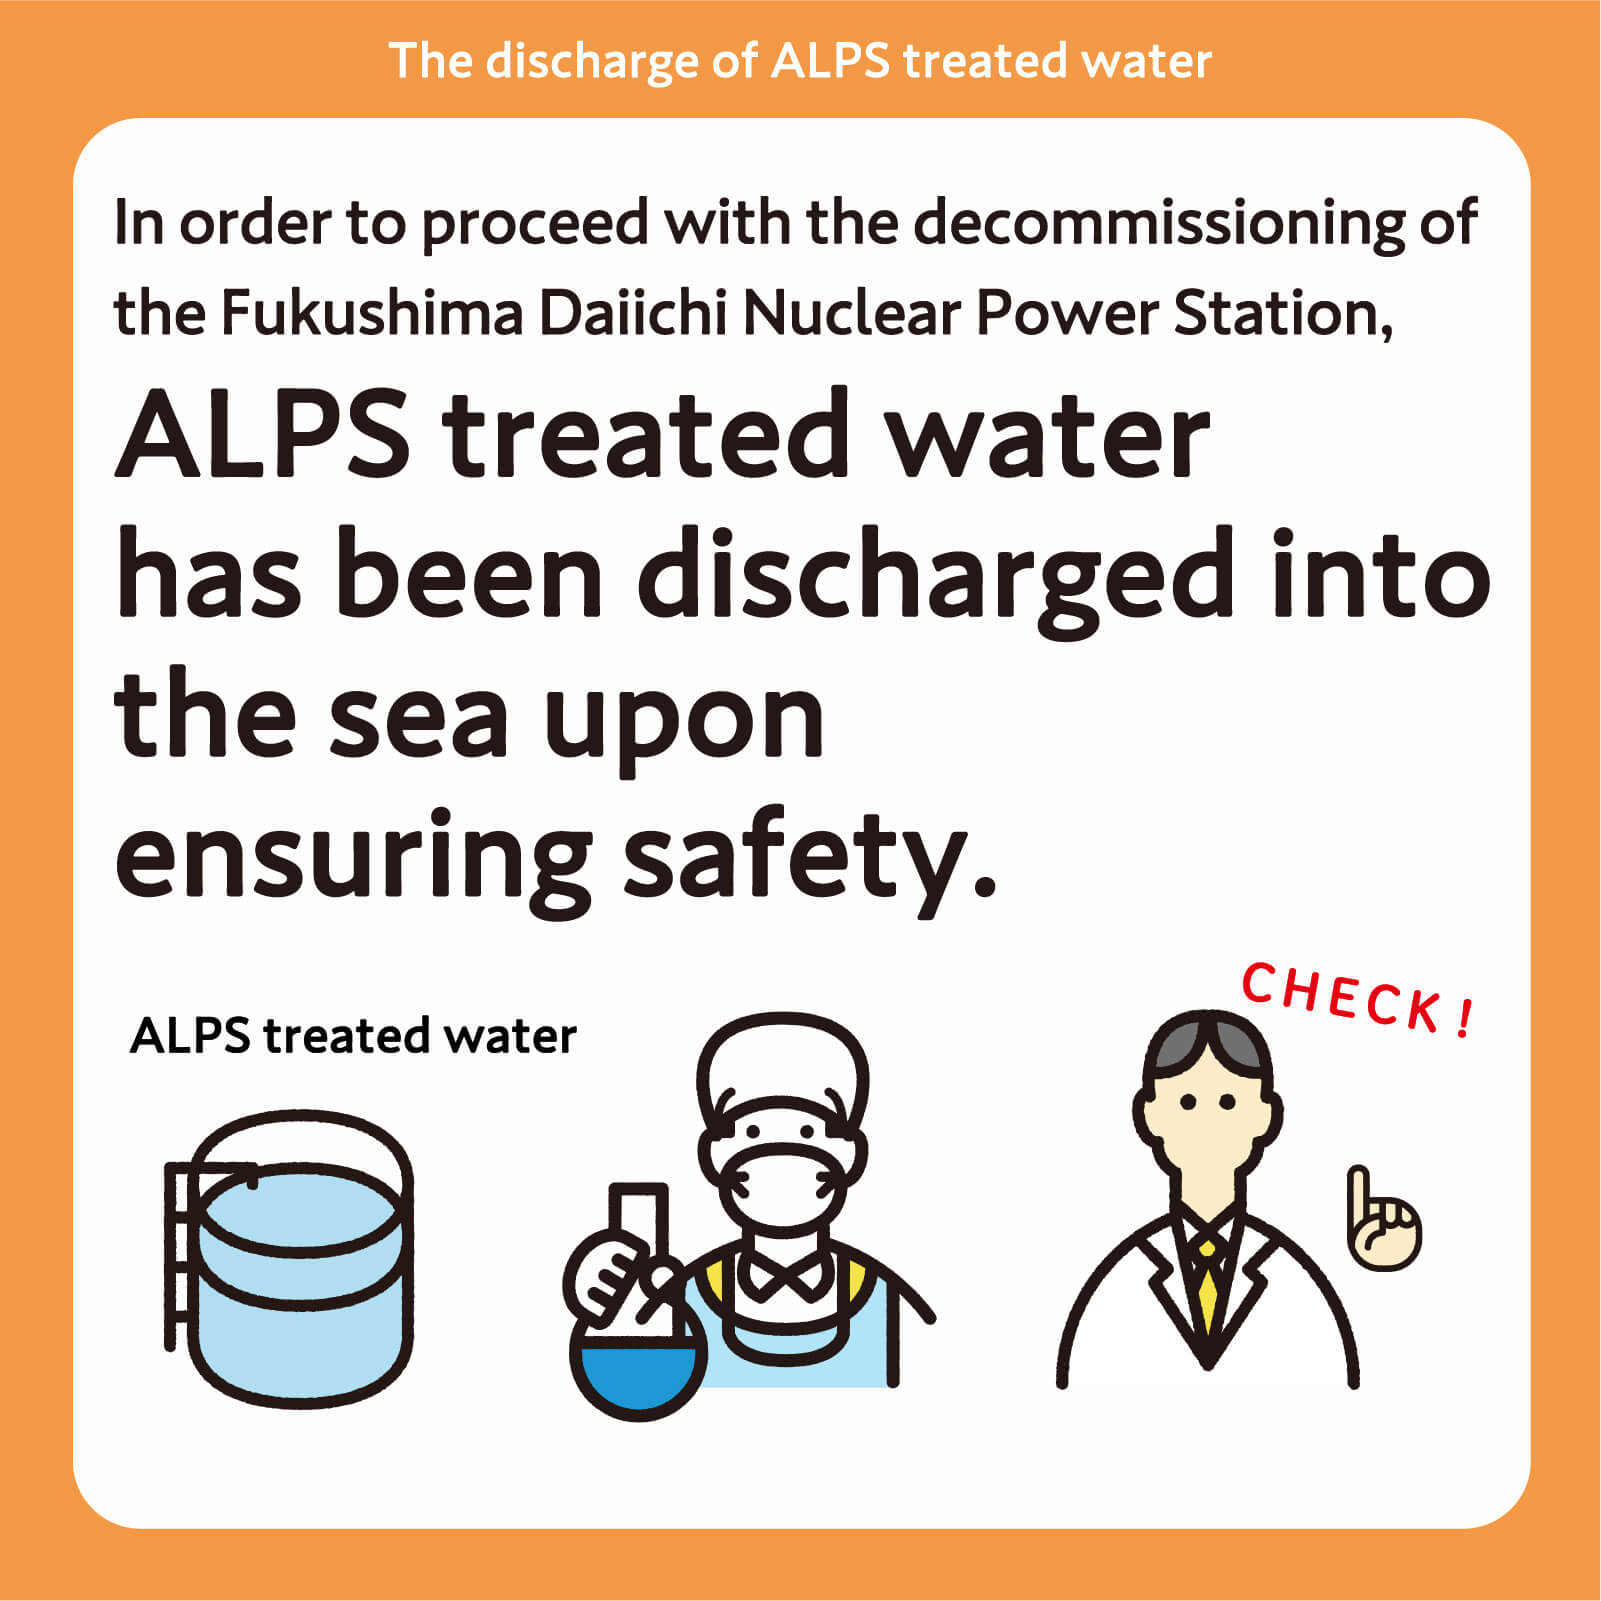 In order to proceed with the decommissioning of the Fukushima Daiichi Nuclear Power Station, ALPS treated water has been discharged into the sea upon ensuring safety.